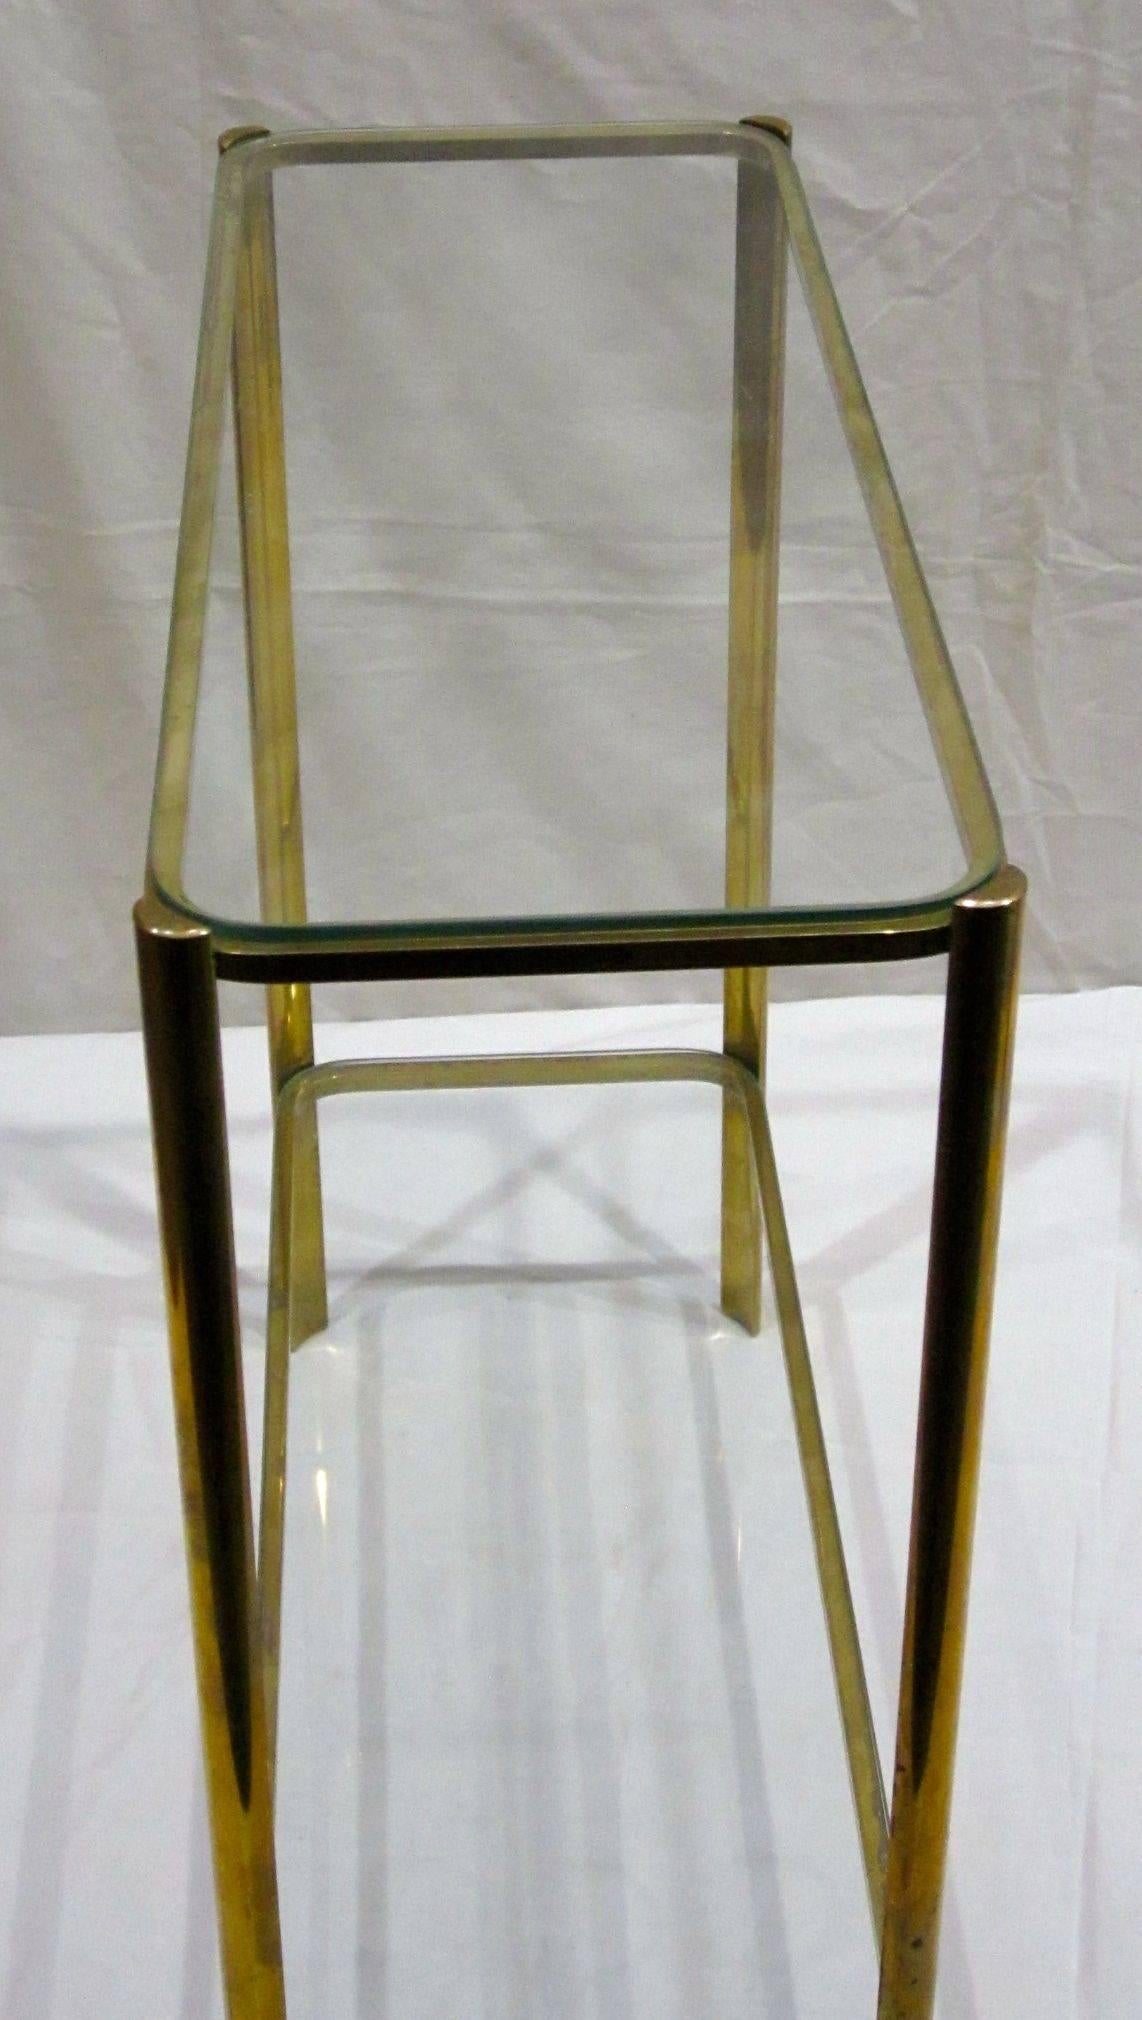 1940s French Maison Malabert bronze side table with two tiers of glass.
Attributed to Jacques Quinet, a very sought after furniture designer, known for his work in bronze.
His furniture designs are pared down, having very little ornamentation. The